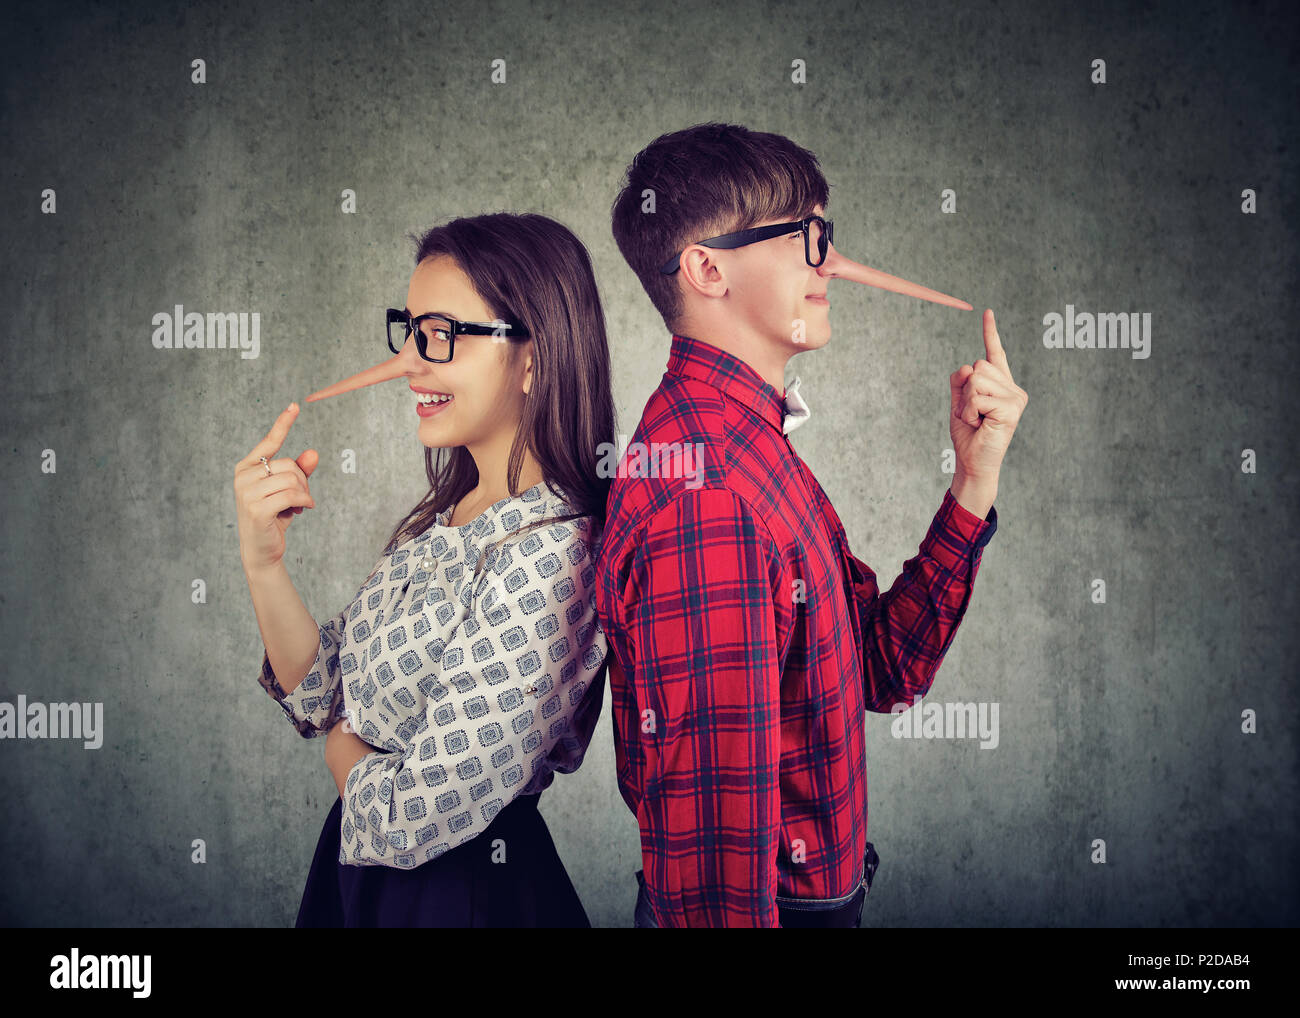 Young couple of cheaters, satnding back to back two liars Stock Photo